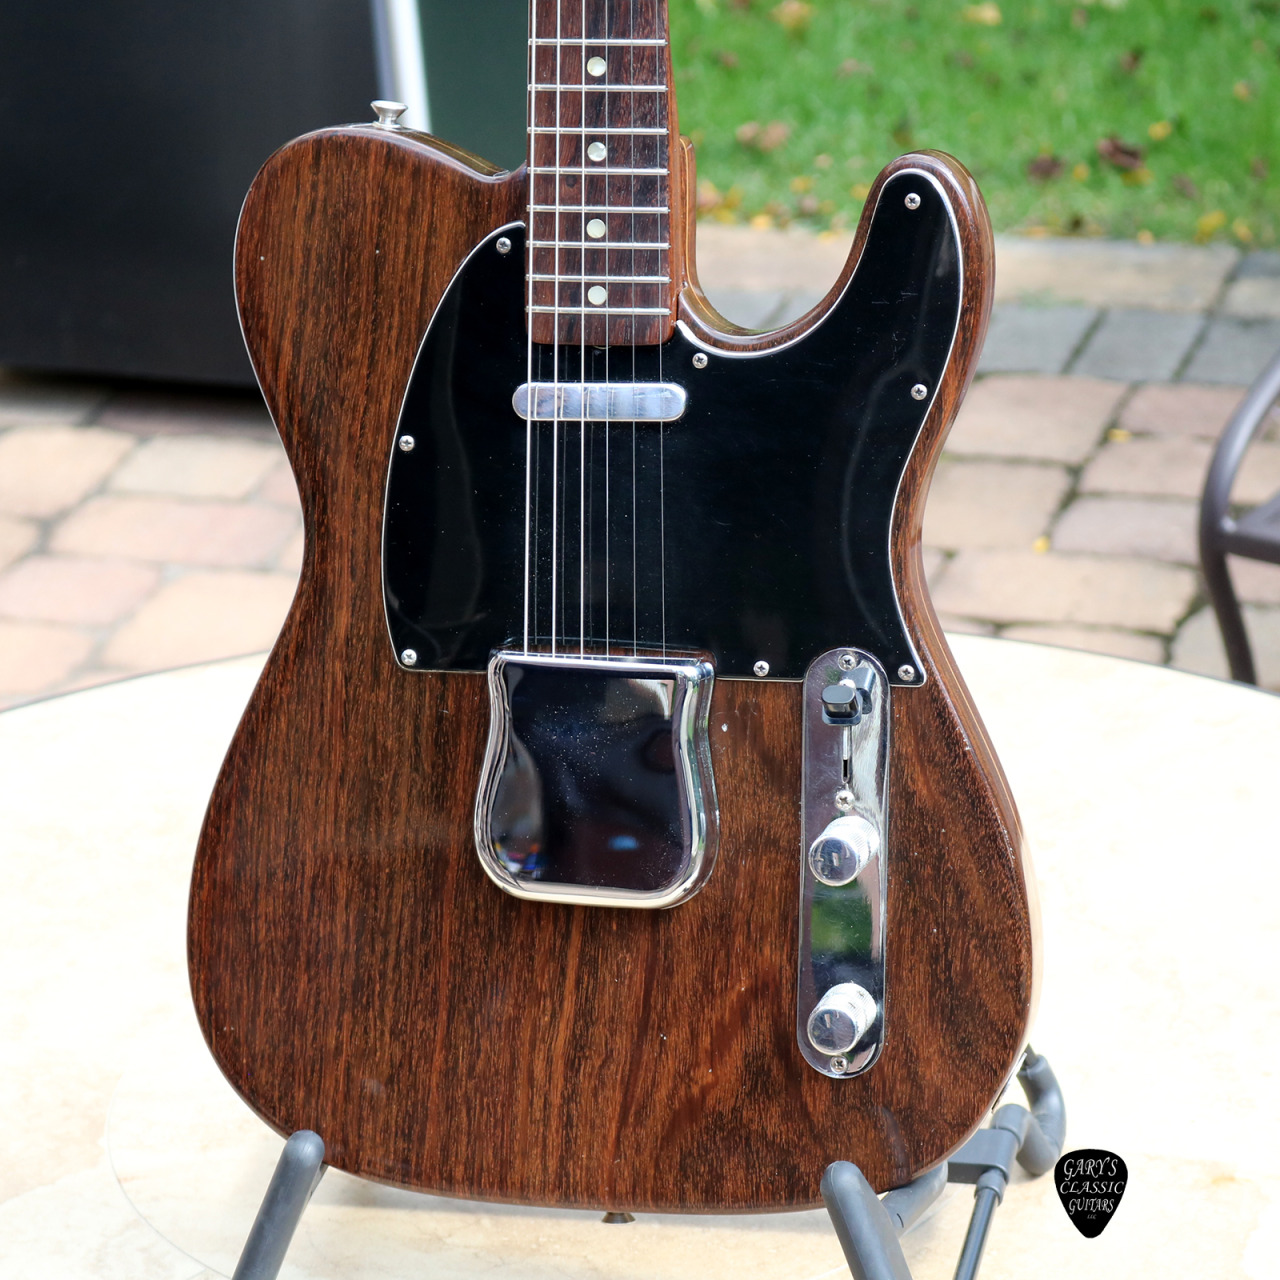 garys-classic-guitars:
“ 1969 Fender Rosewood Telecaster, Just like George Harrison’s, Rare Model, Gorgeously figured solid Rosewood body, neck & fingerboard
”